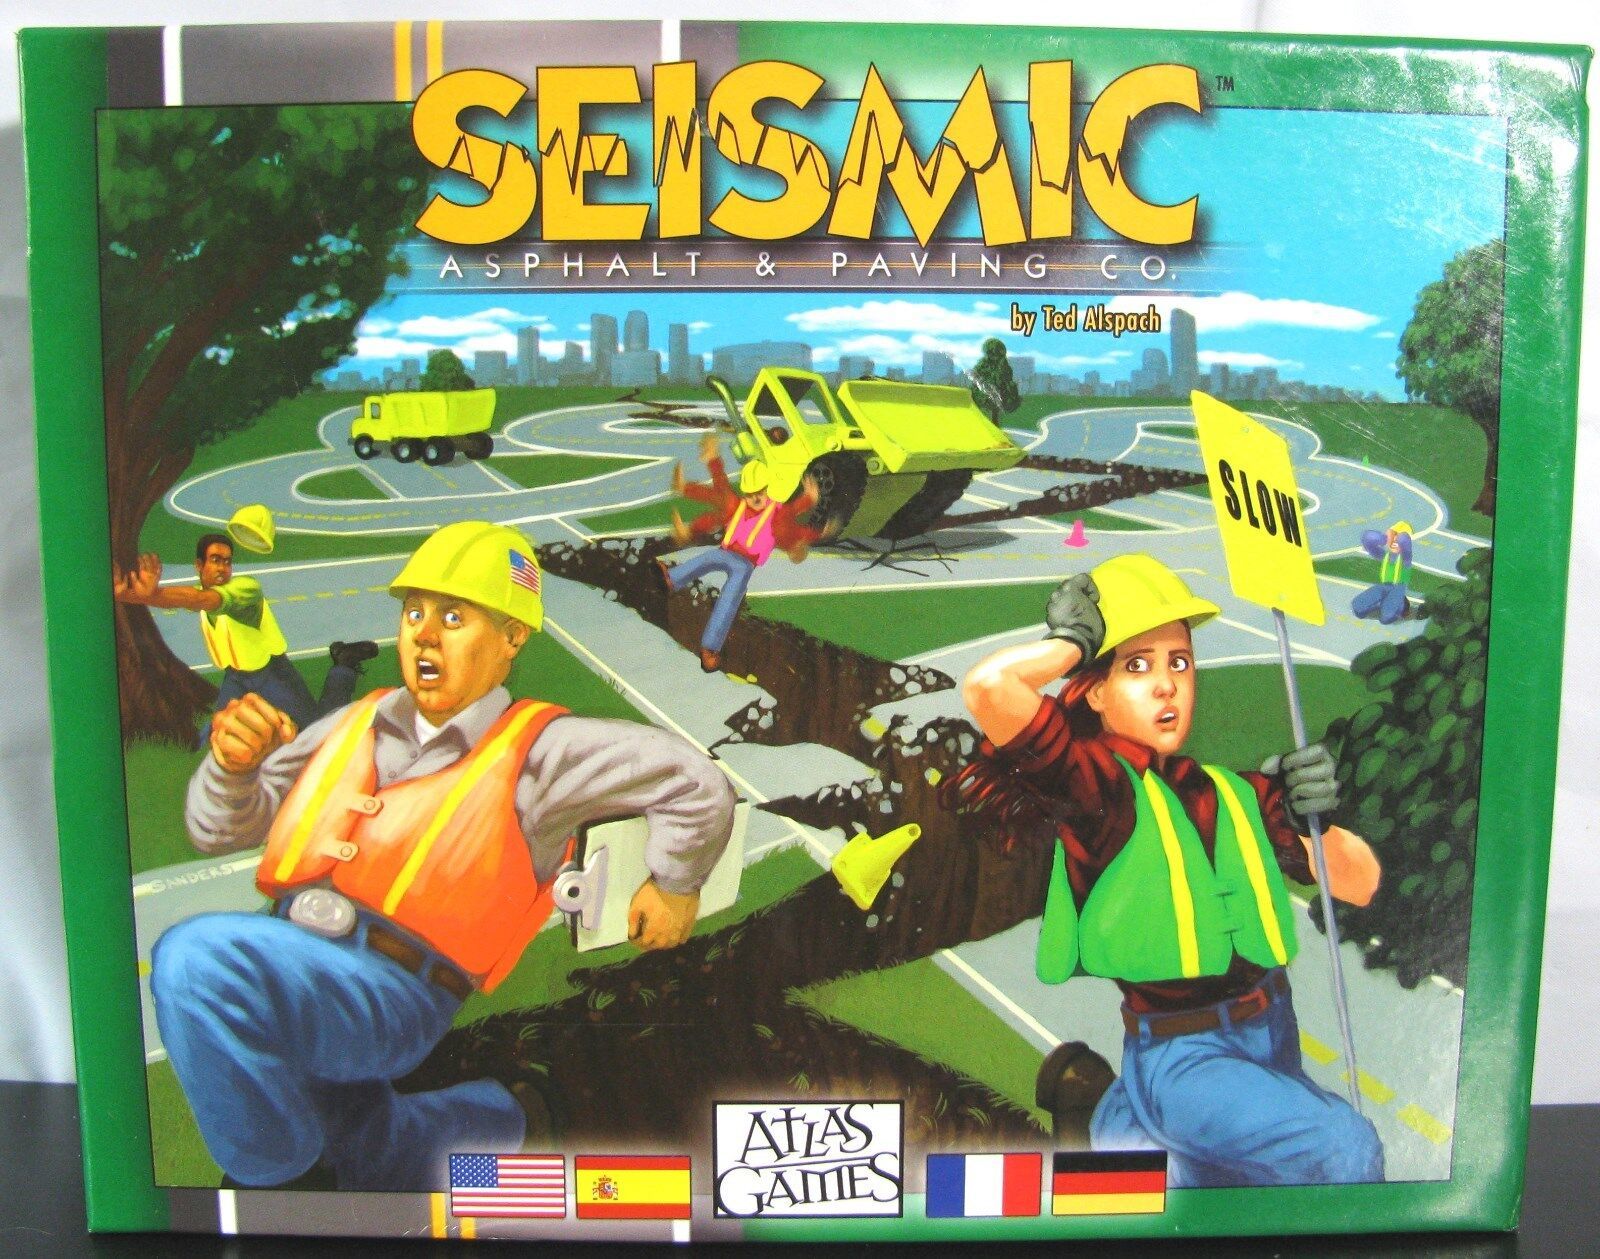 New Seismic Asphault & Paving Co Board Game Strategy Road Building Atlas Games  - $14.80